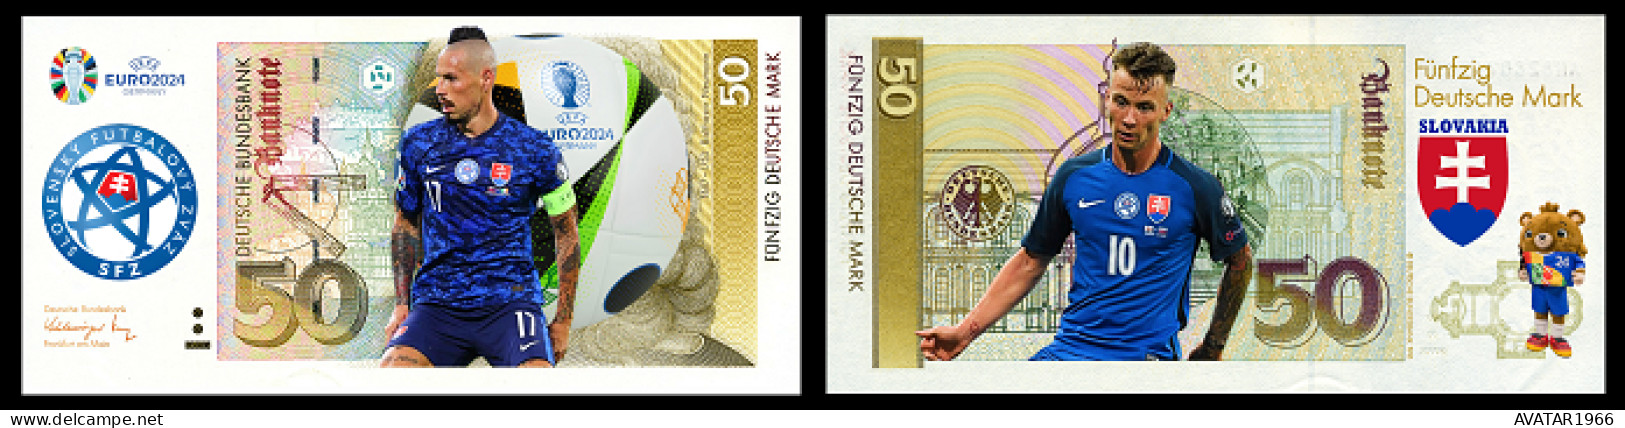 UEFA European Football Championship 2024 Qualified Country Slovakia  8 Pieces Germany Fantasy Paper Money - [15] Commémoratifs & Emissions Spéciales